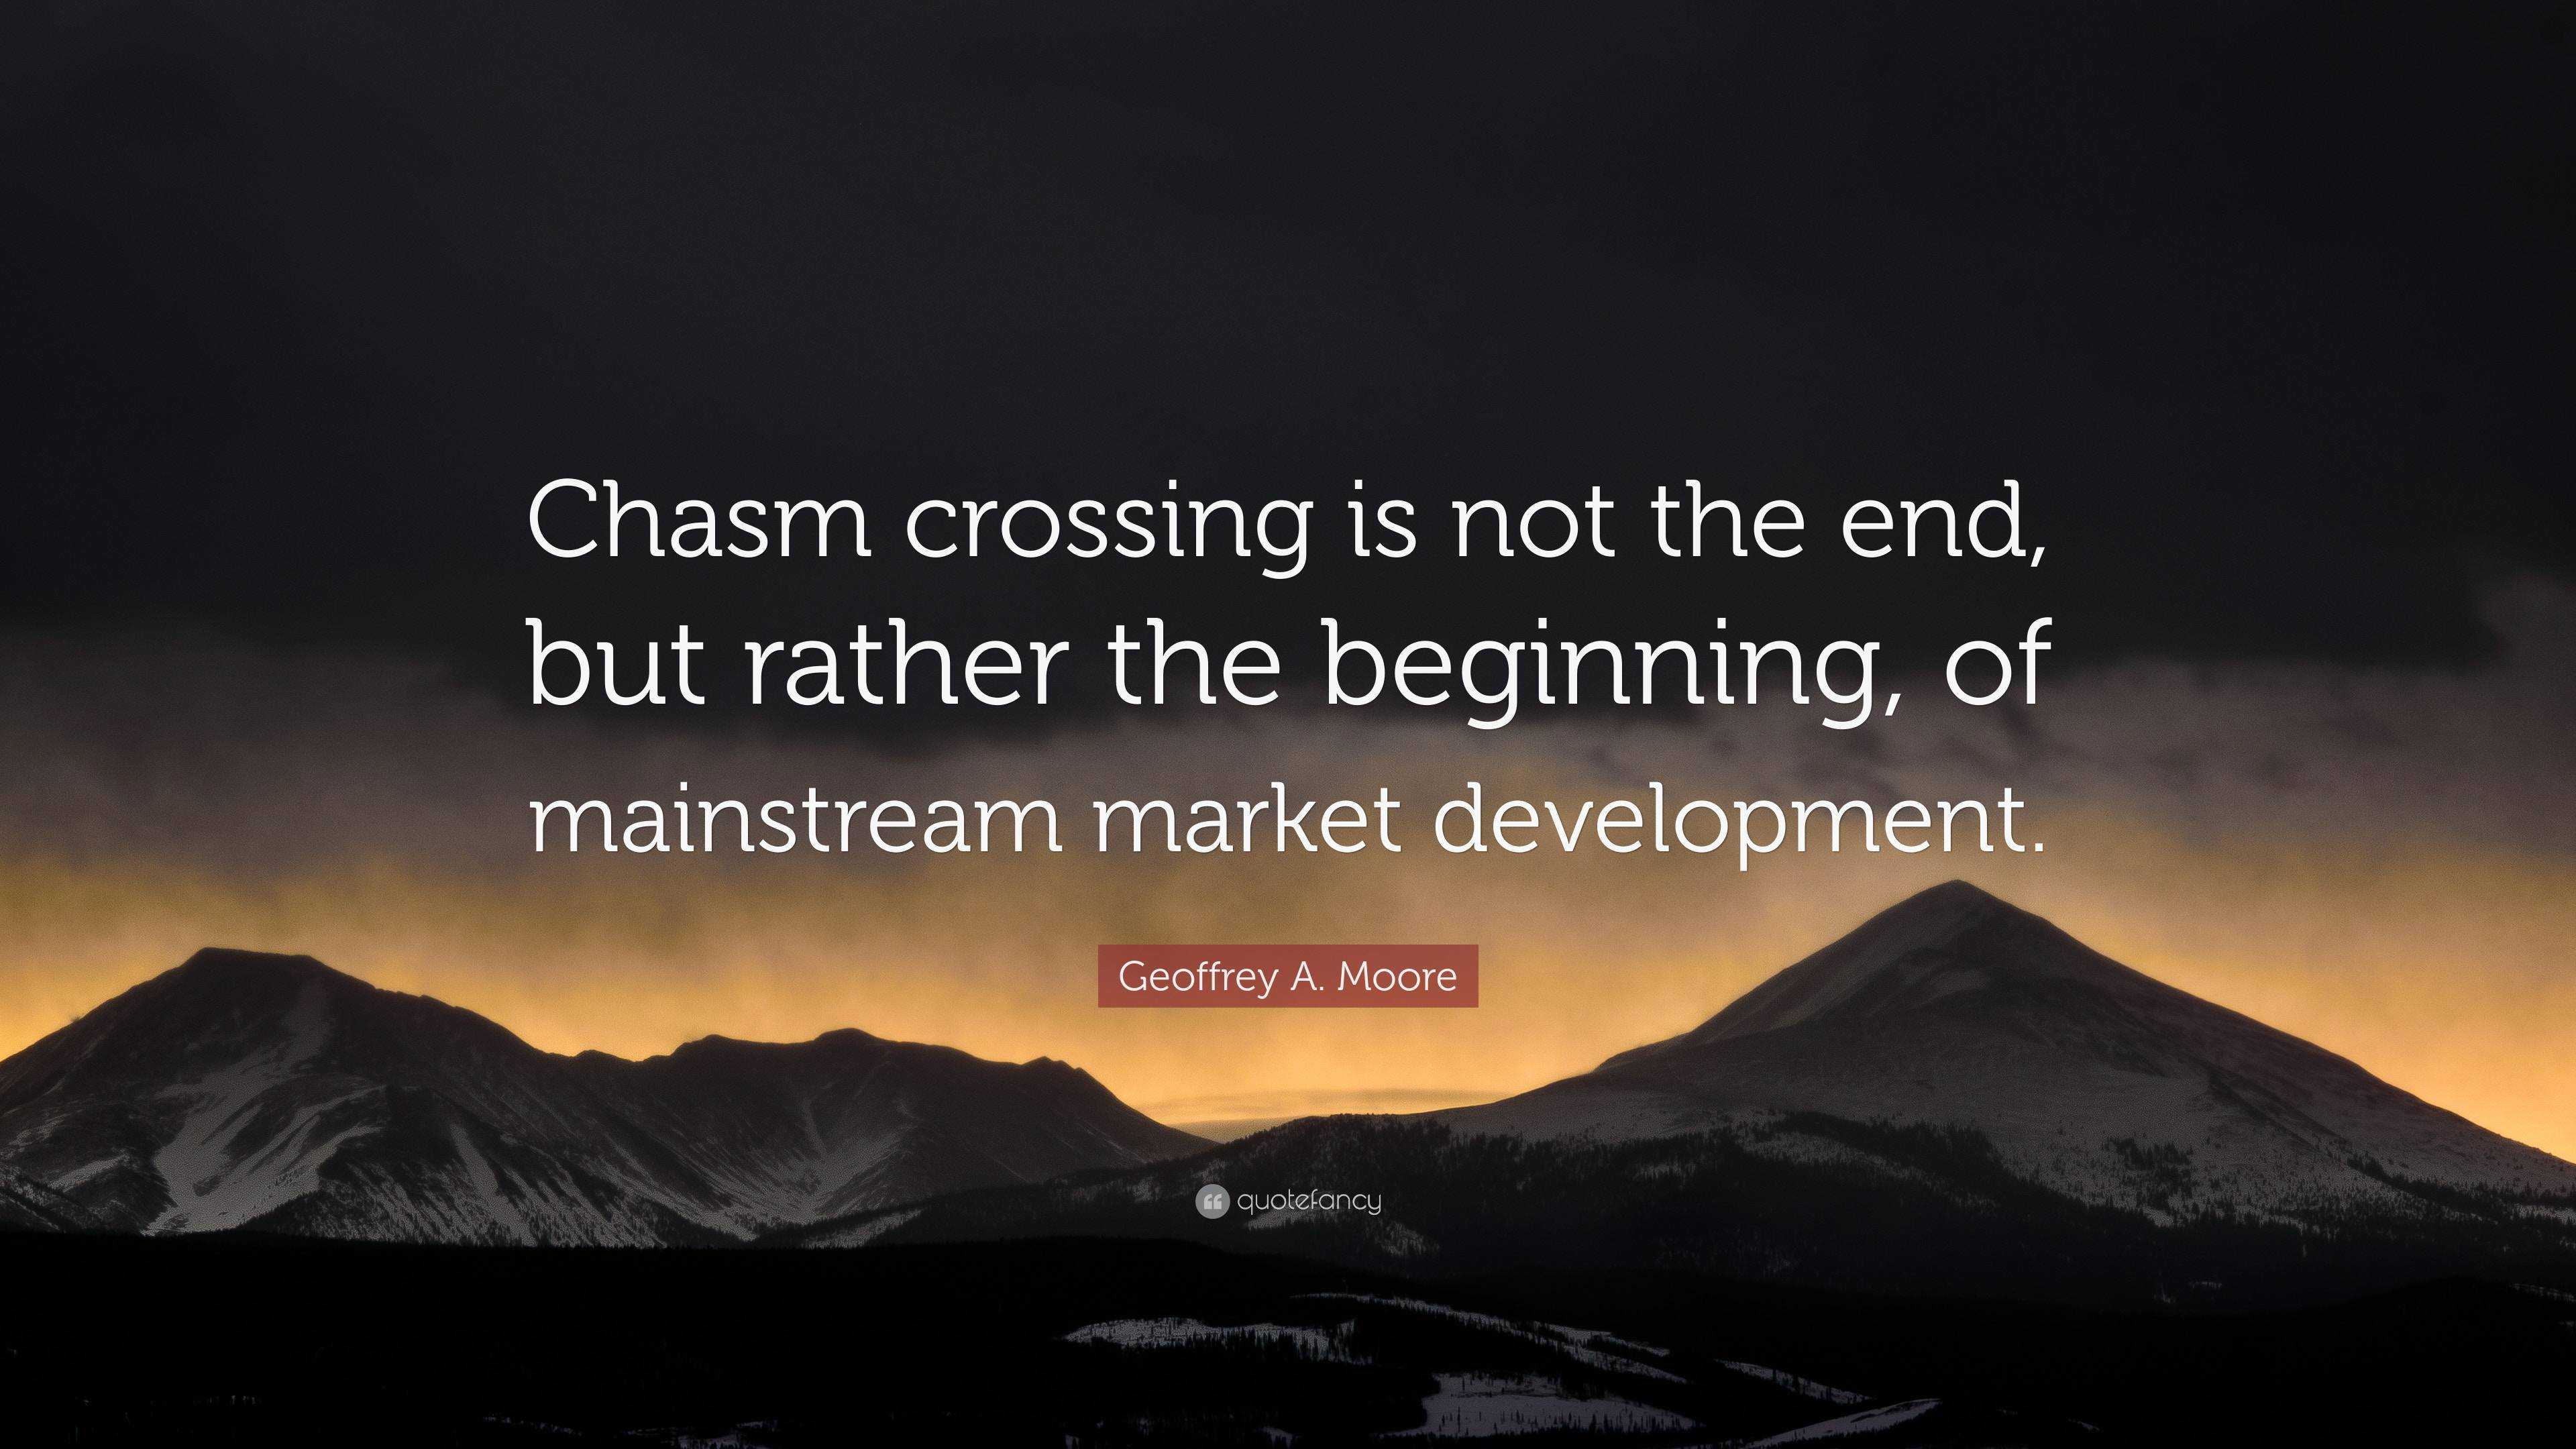 Geoffrey A. Moore Quote: “Chasm crossing is not the end, but rather the ...